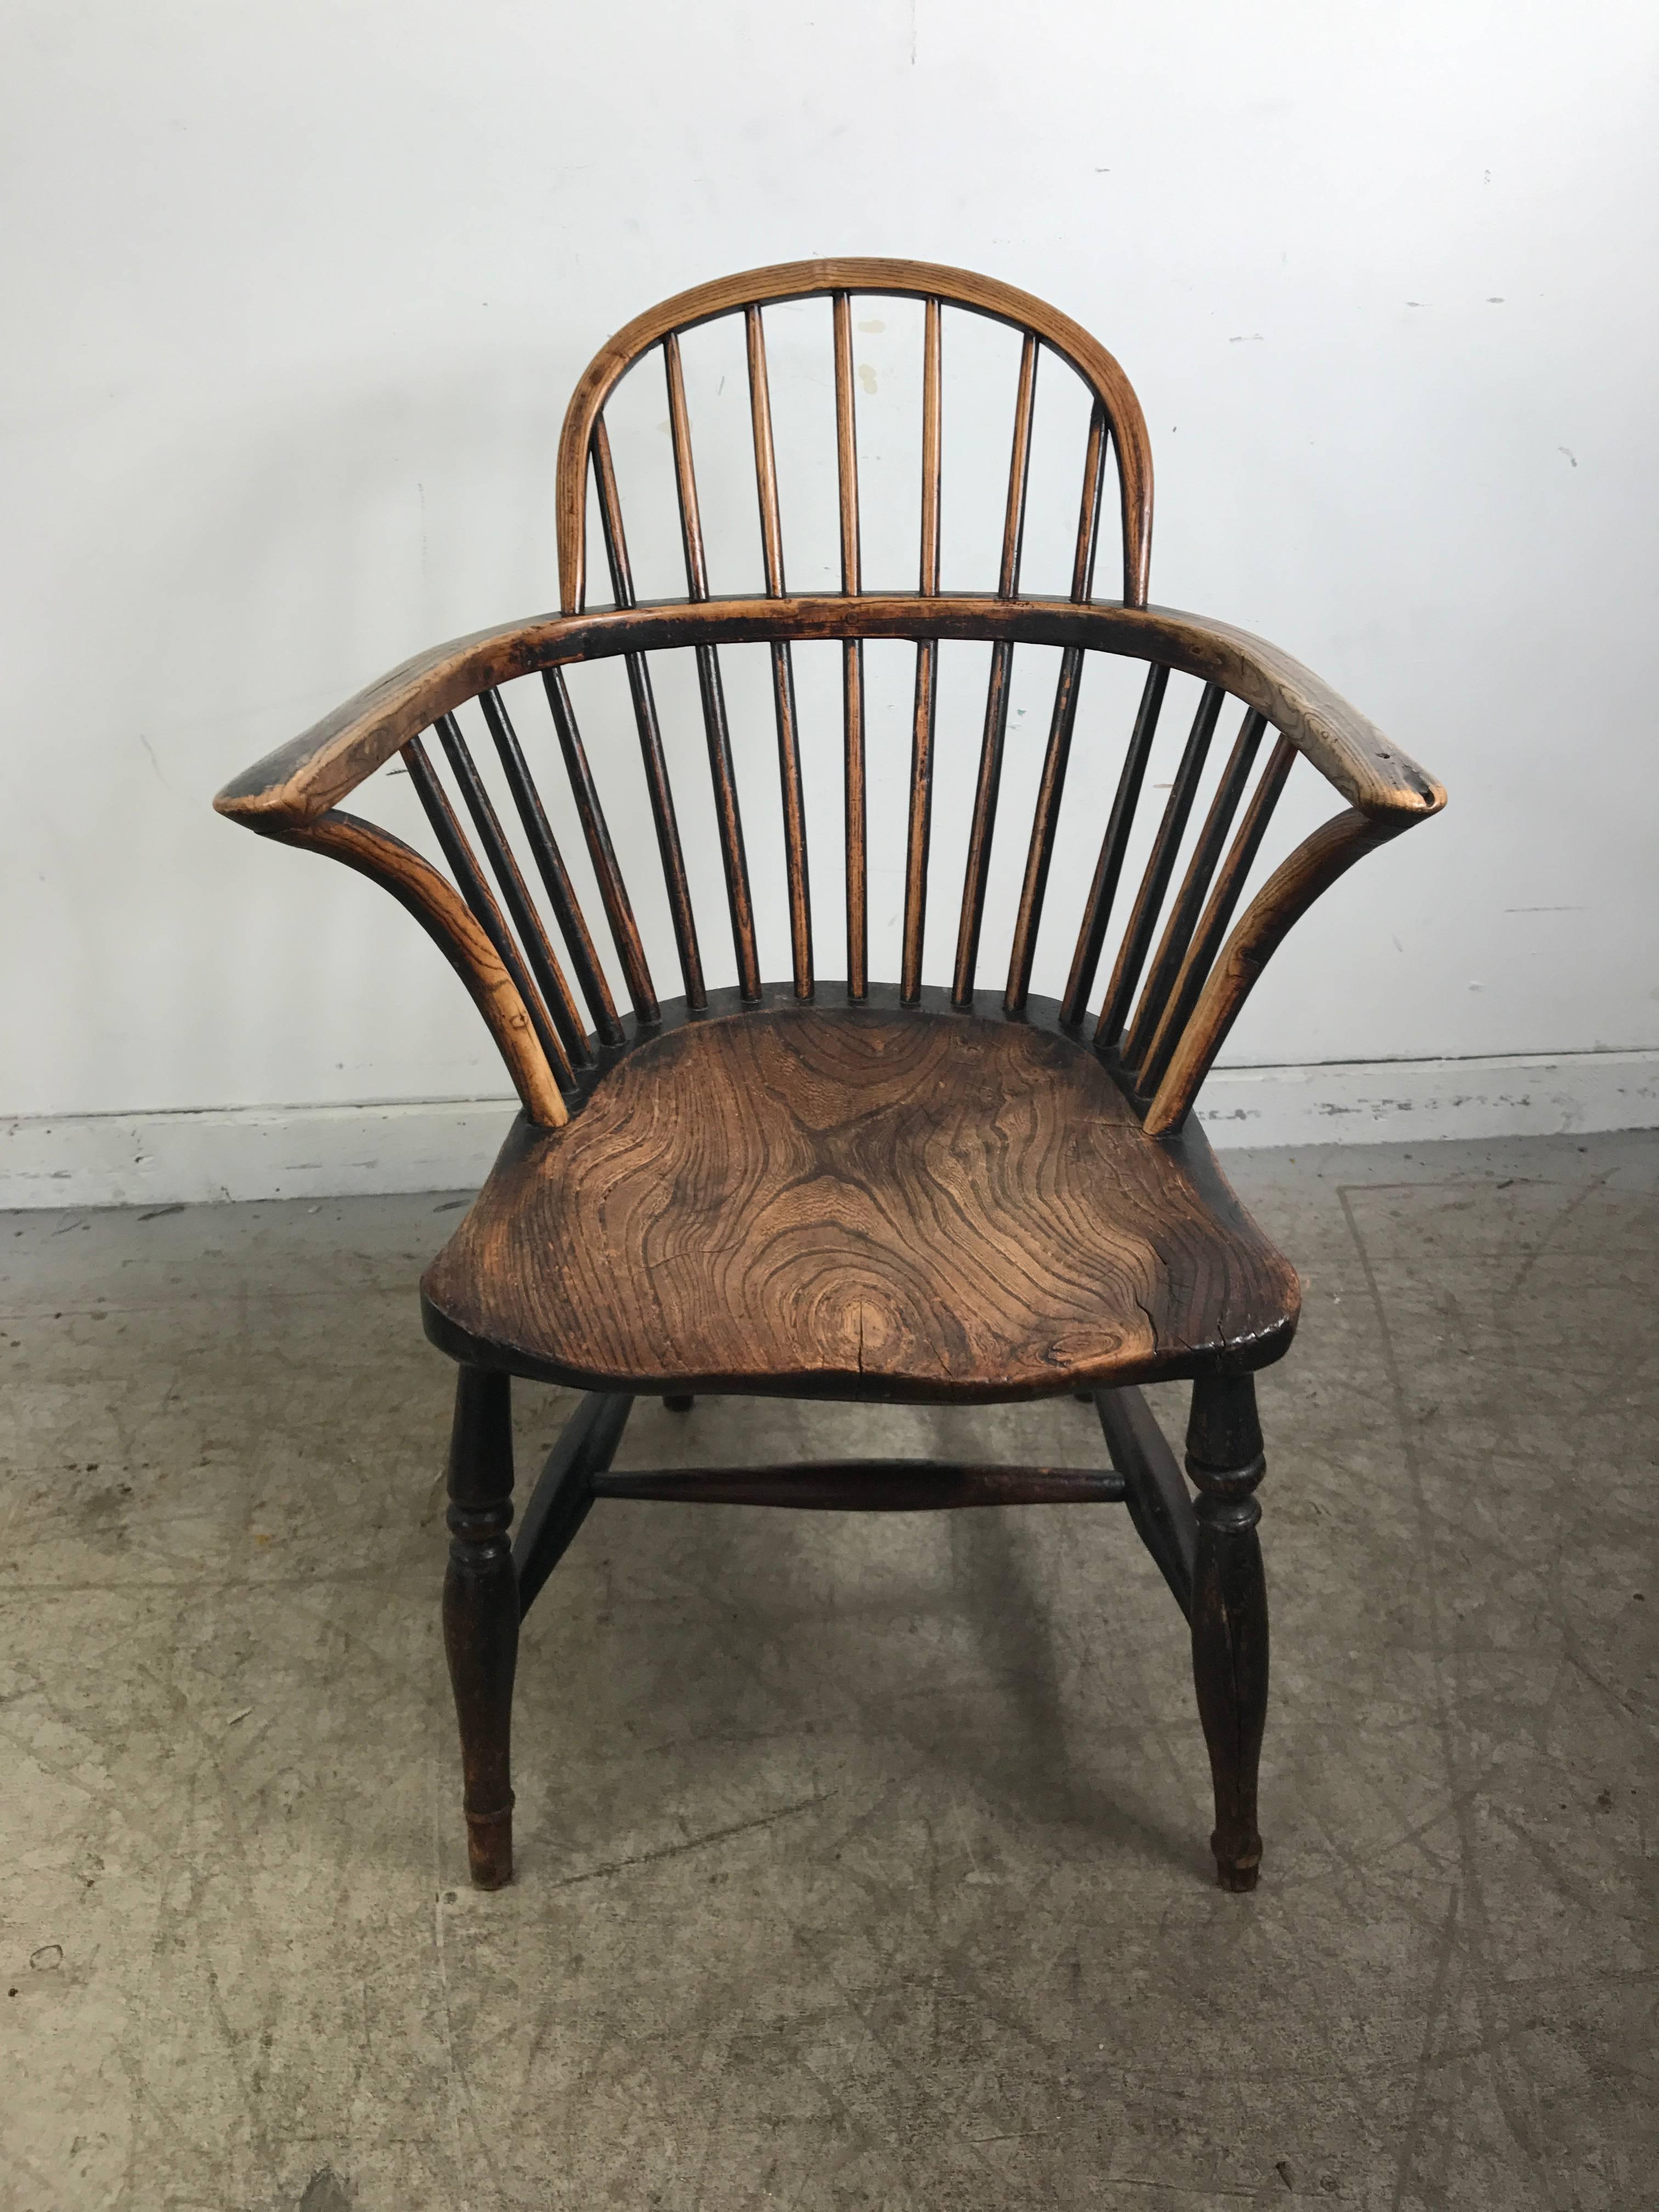 Classic English elm antique Windsor chair, stunning wood grain, superior quality and construction, wonderful finish, patina, extremely comfortable,.